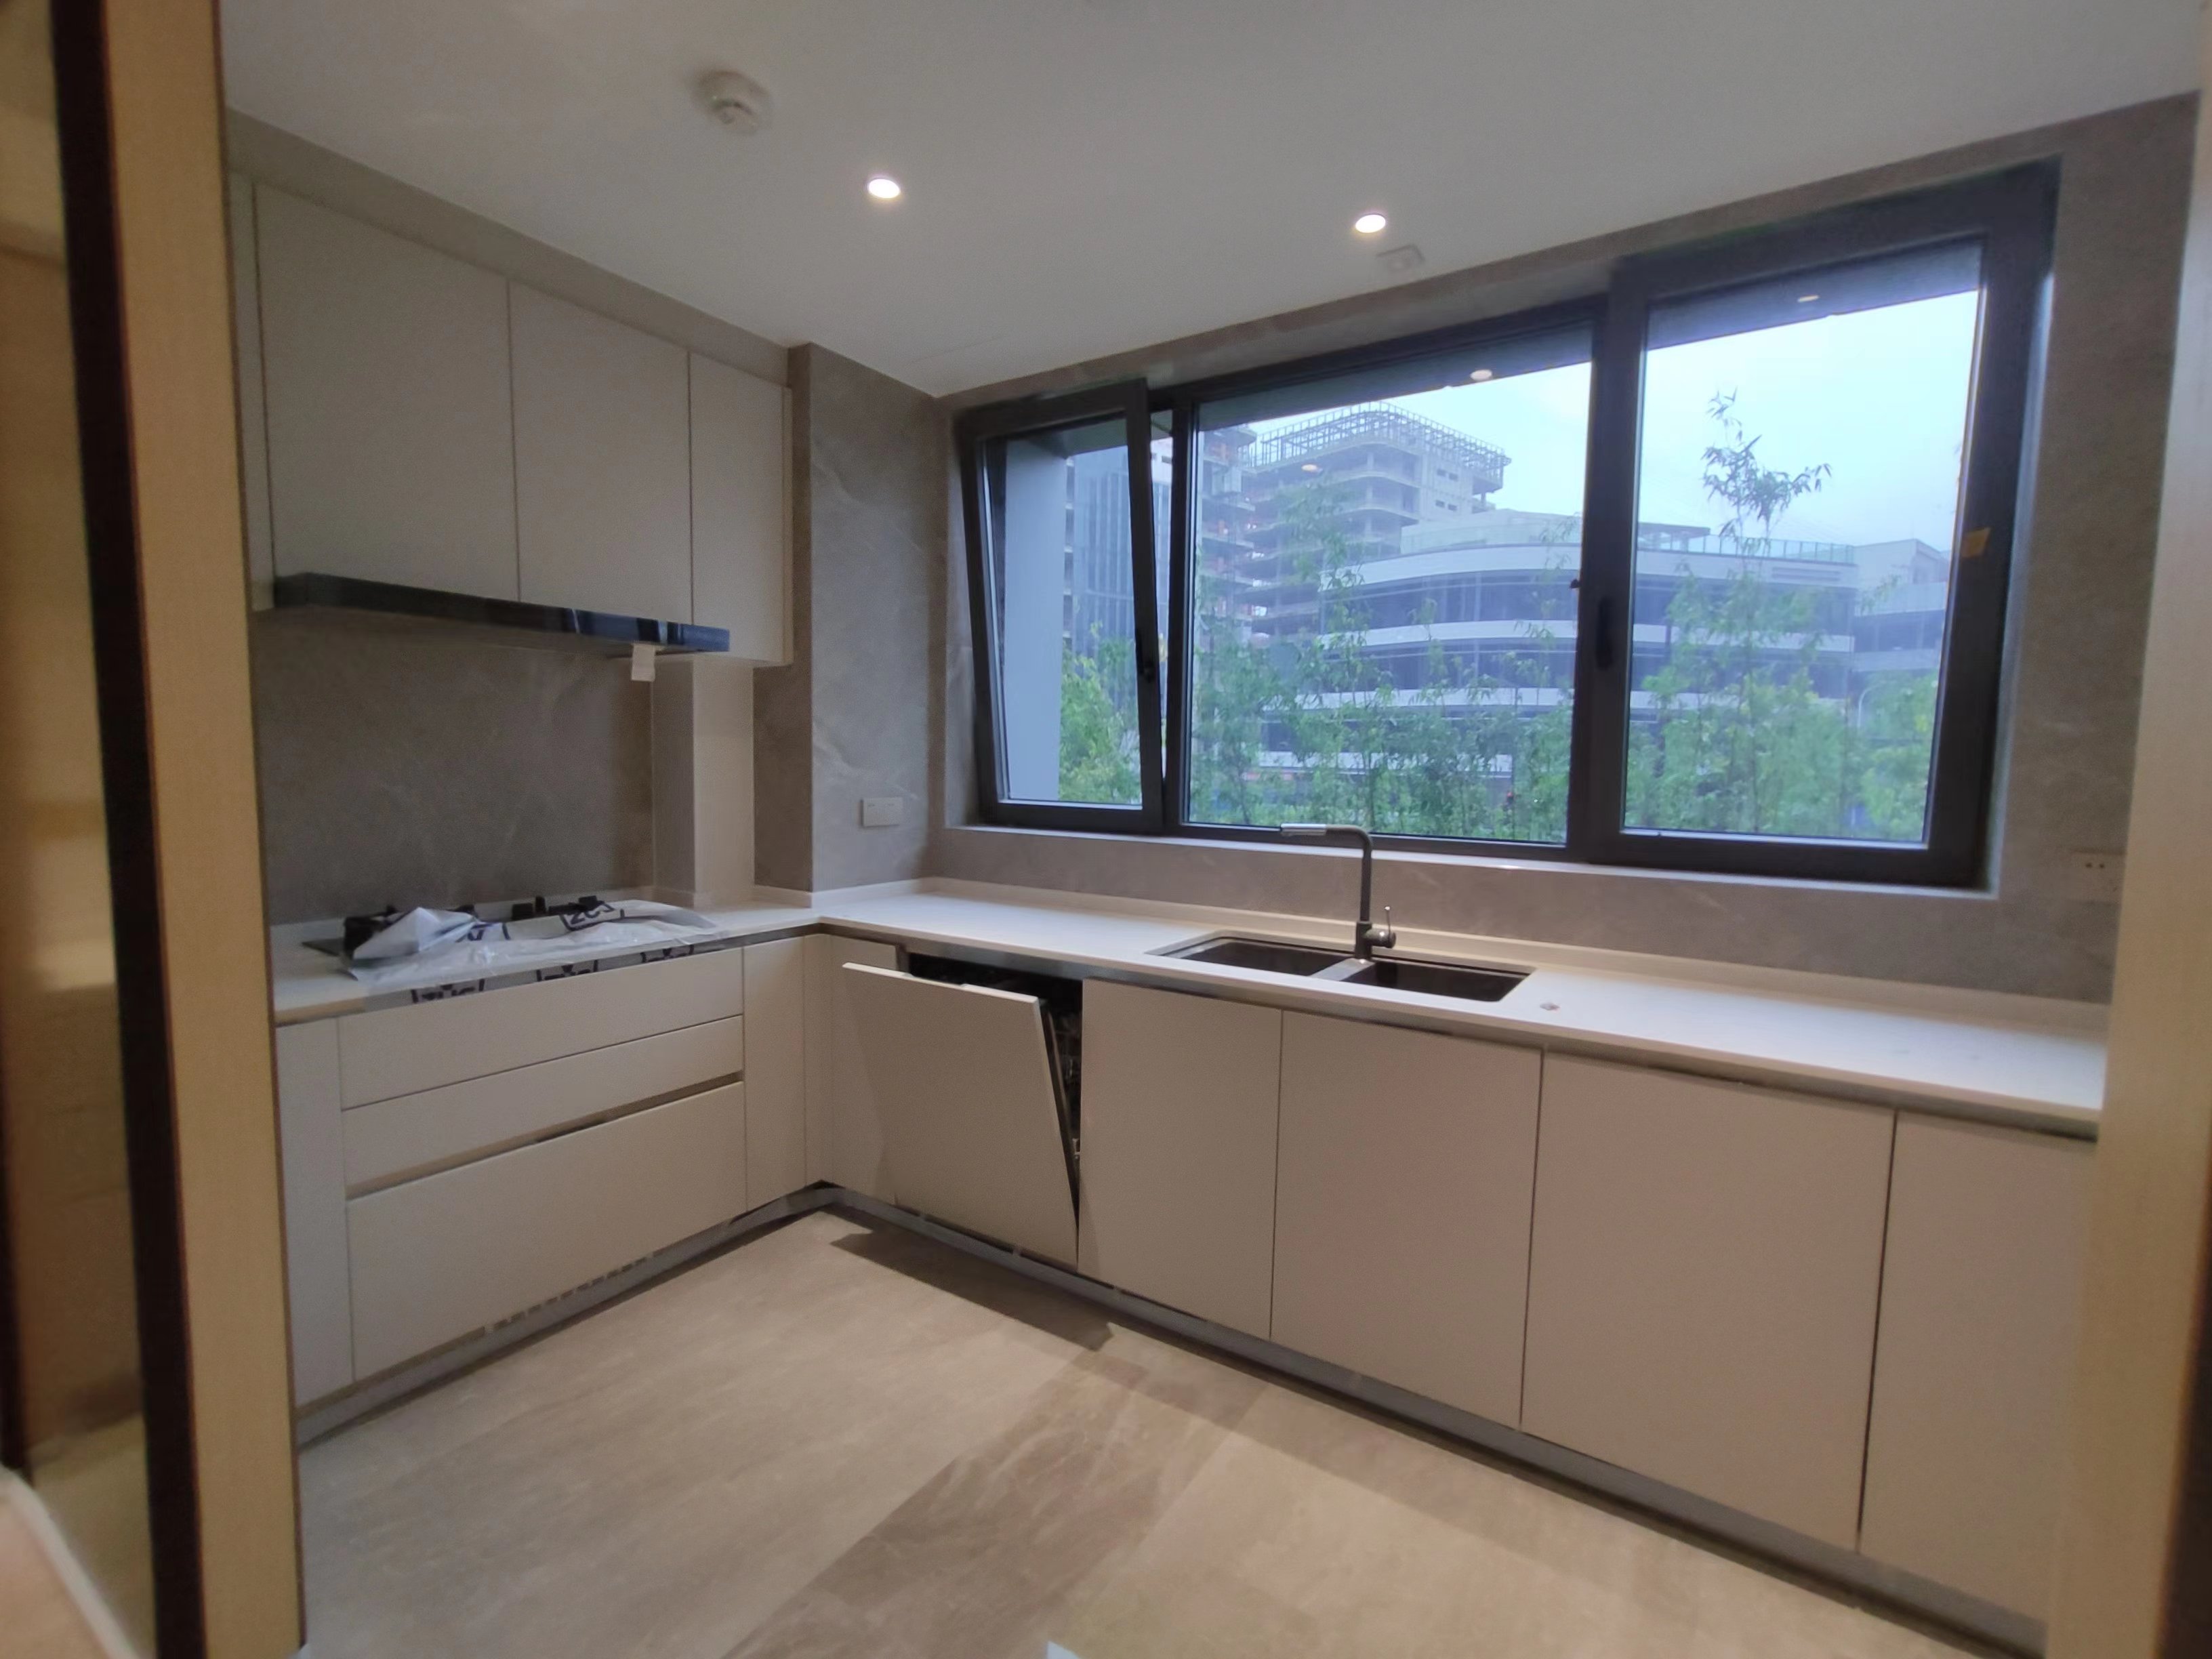 Chinese kitchen Brand-new High-end 3BR Riverside Apartment for Rent near Shanghai’s Lujiazui